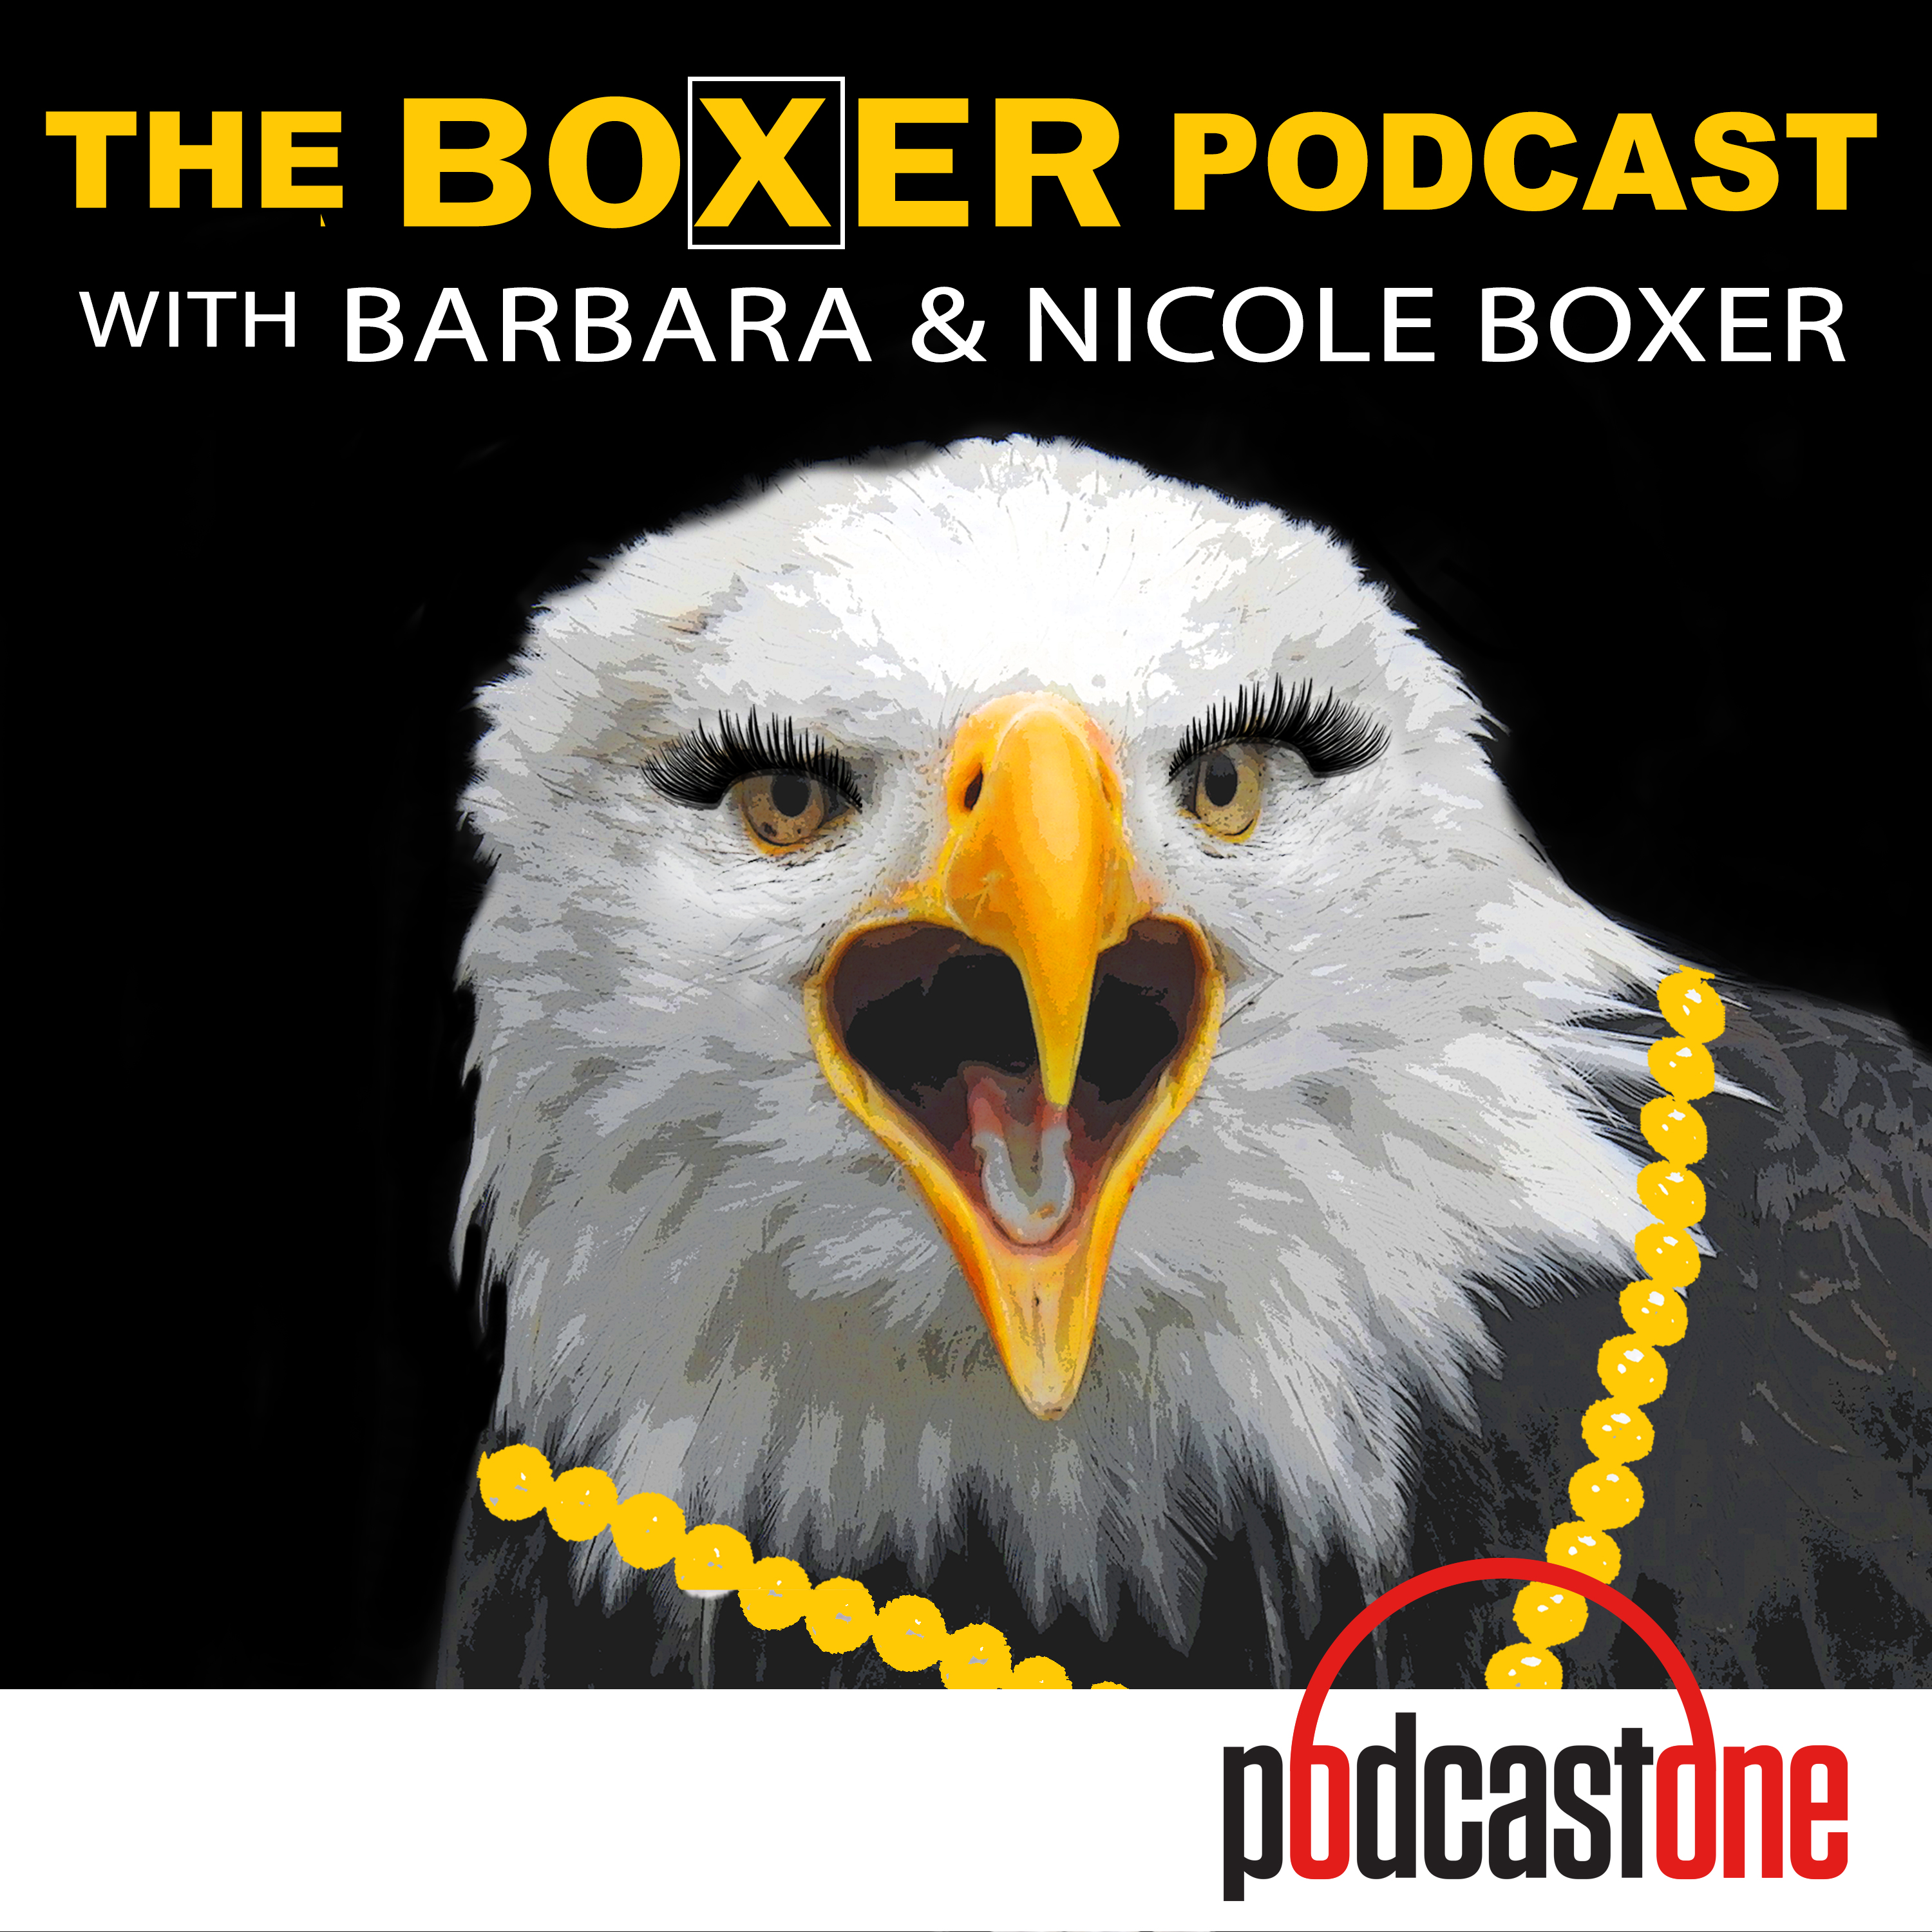 The Boxer Podcast with Barbara and Nicole Boxer